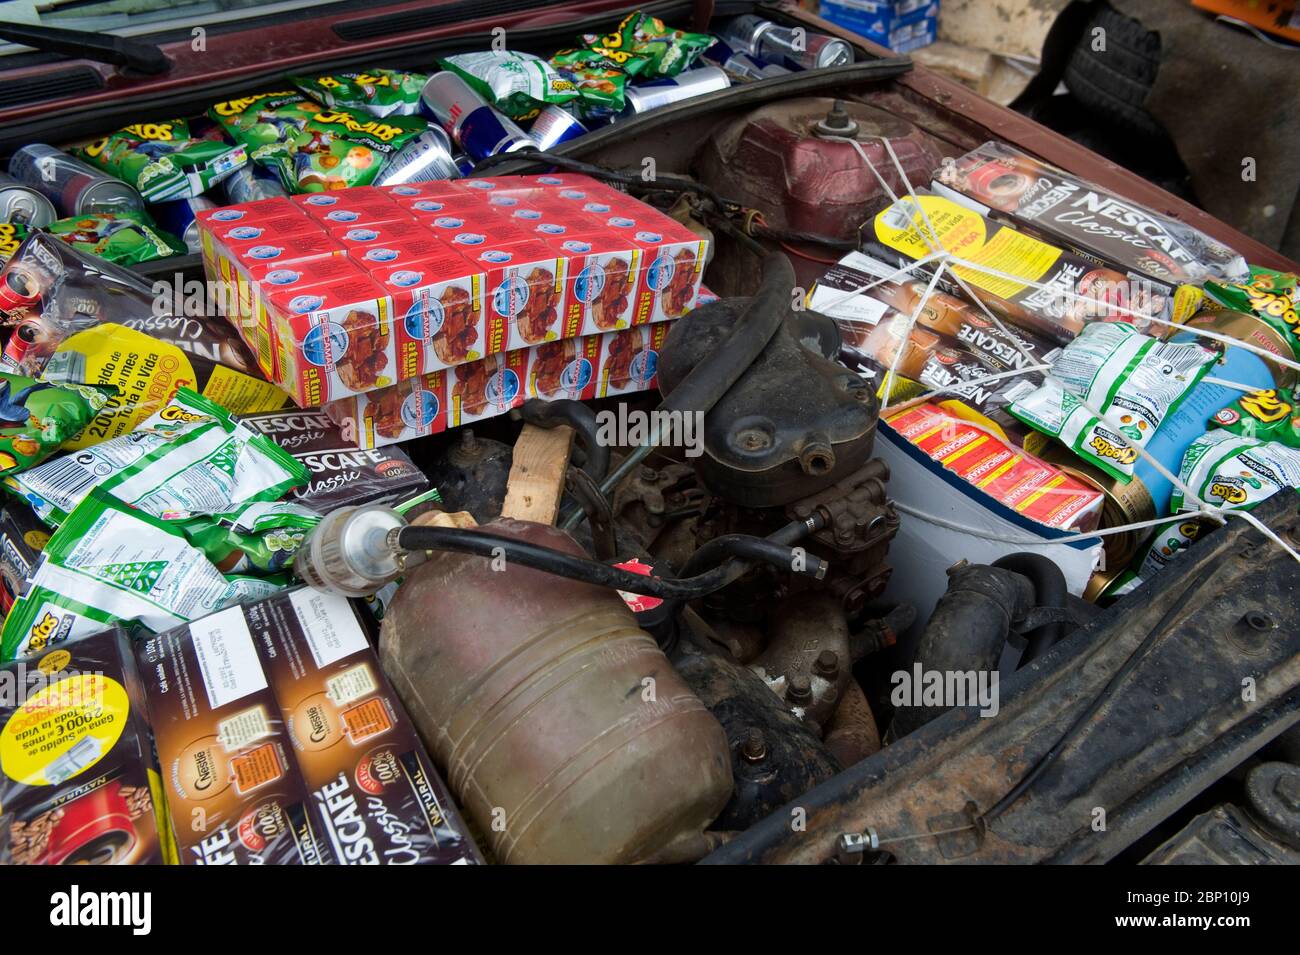 MELILLA, SPAIN - APRIL 22, 2010 : Food items hidden in a car engine ready to be smuggled into Morocco. Warehouses located around the traditional cross border of Beni Anzar supply all type of goods being smuggled introduced in  Morocco on April 22 , 2010 in Melilla. Spain. ( Photo by Jordi Cami  ) Stock Photo